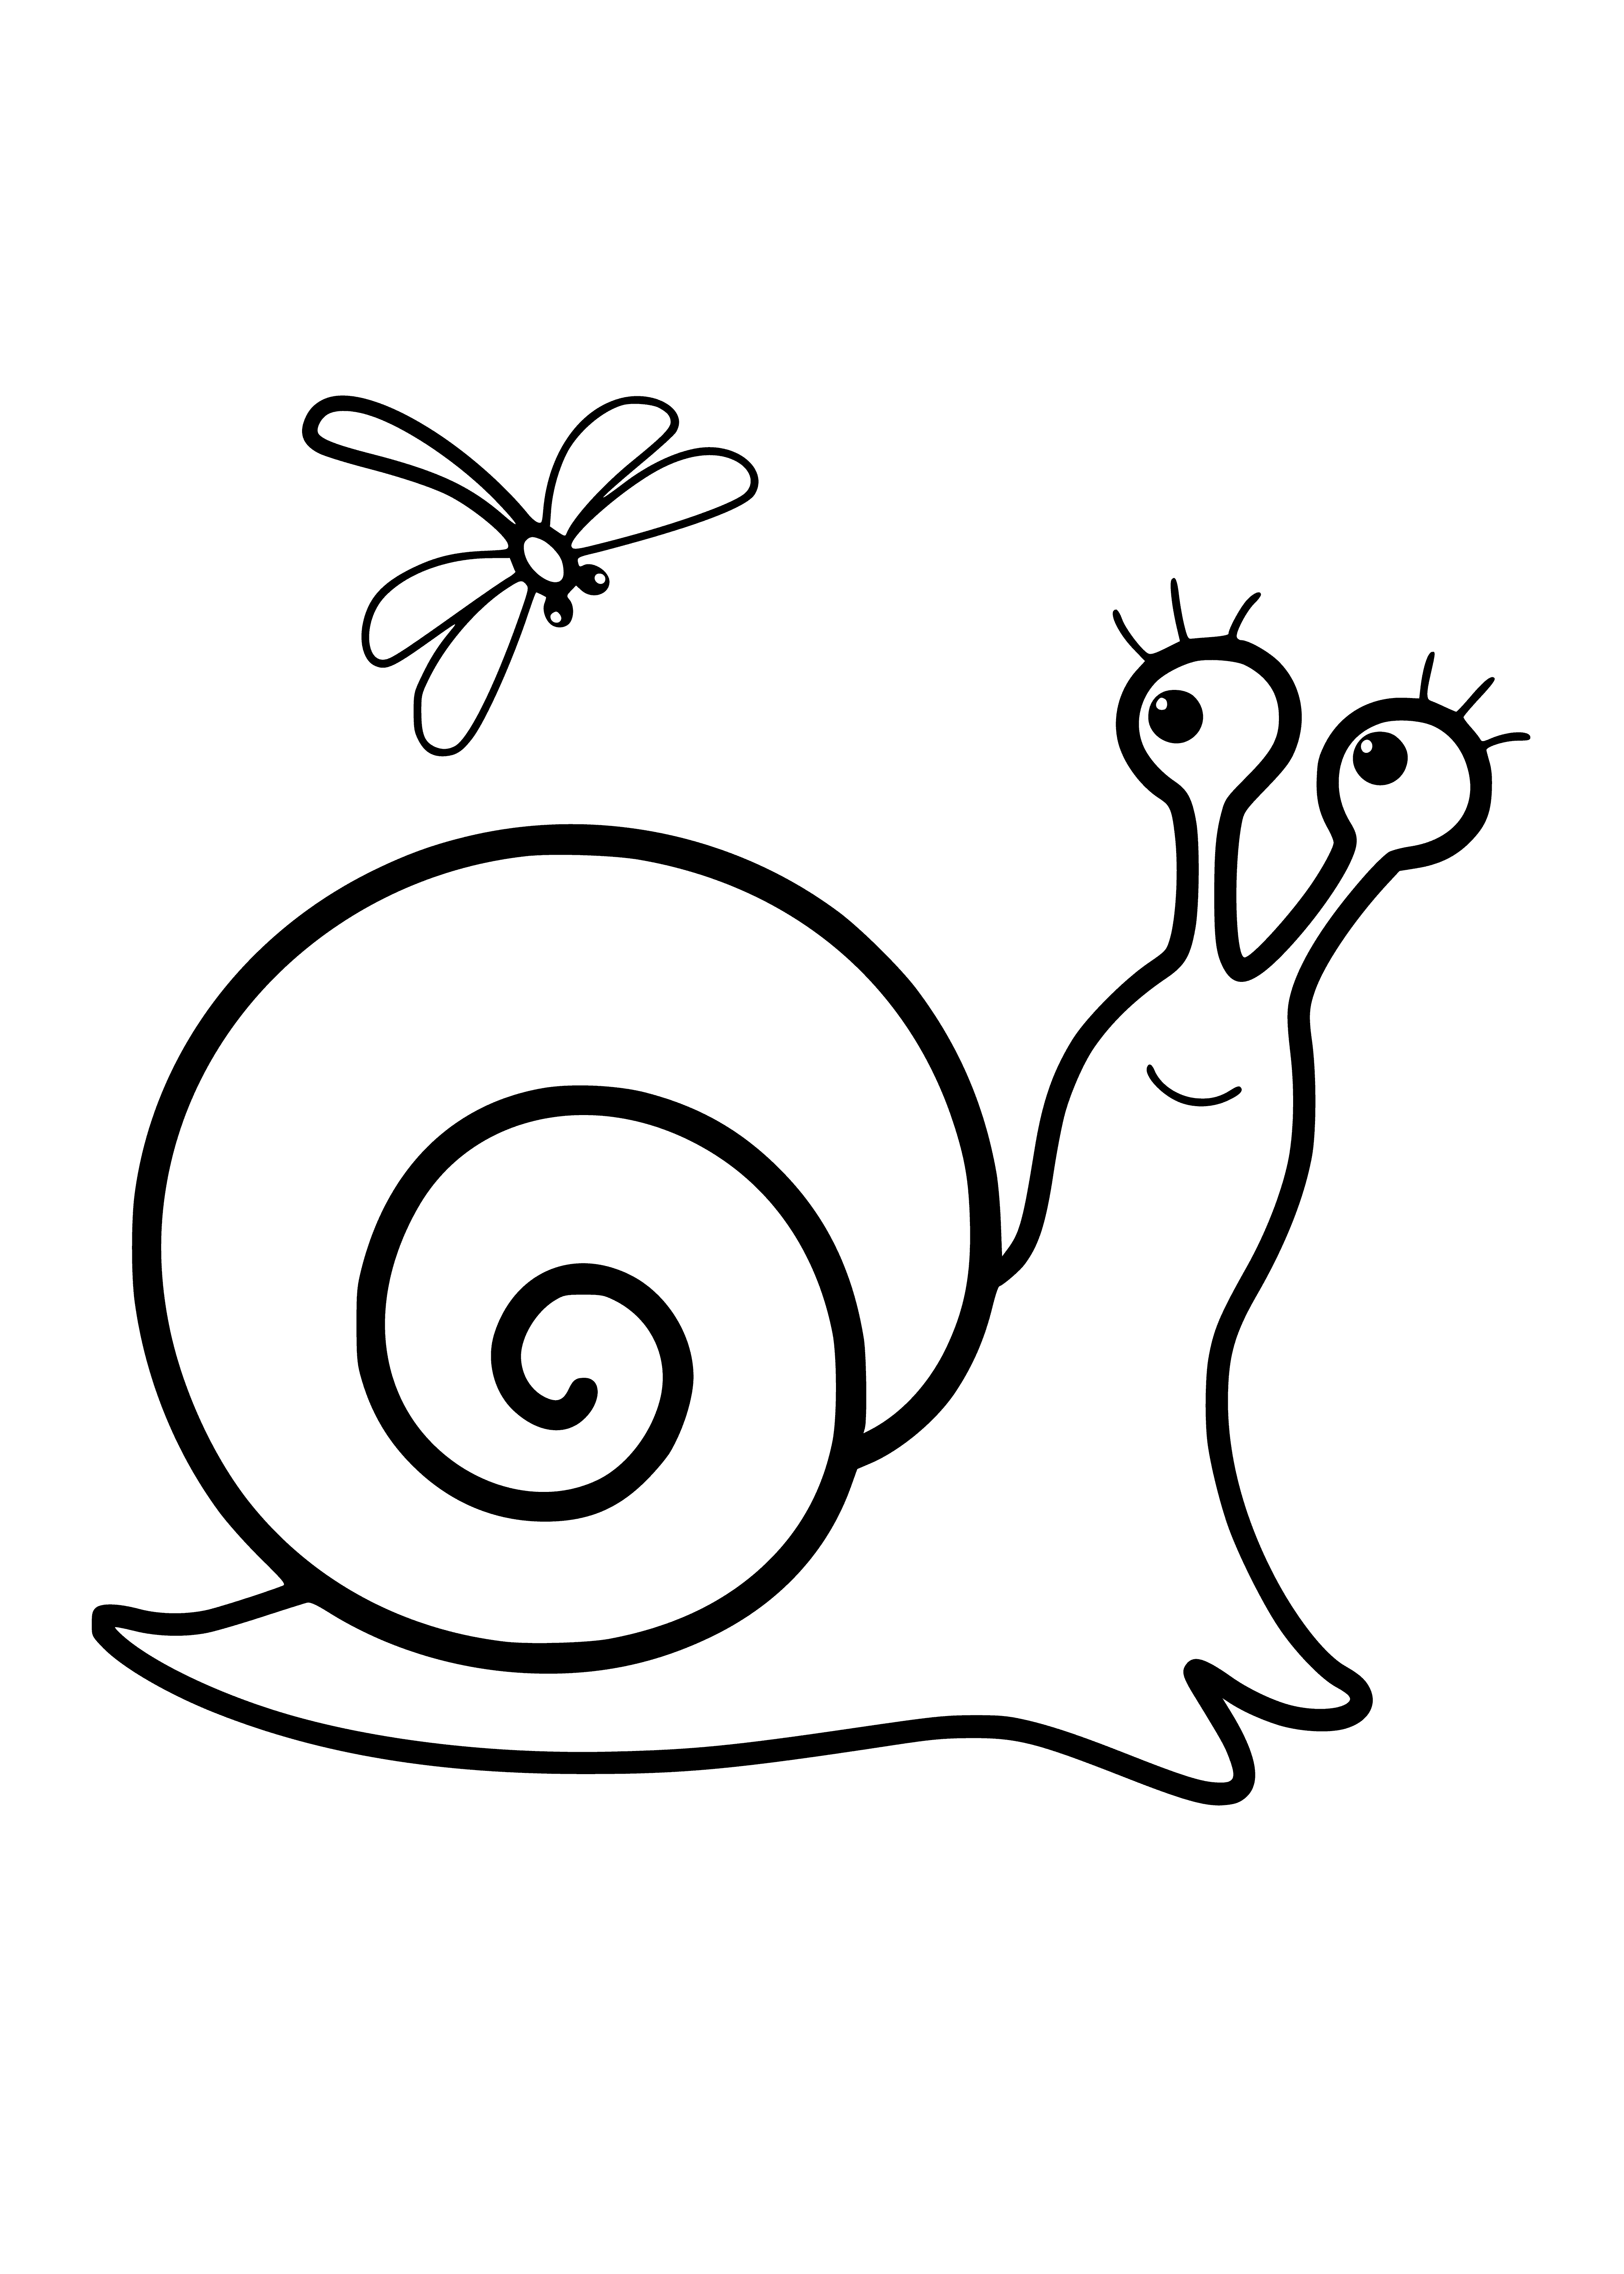 coloring page: Coloring page of snail on leaf w/ brown shell & purple flower next to it.